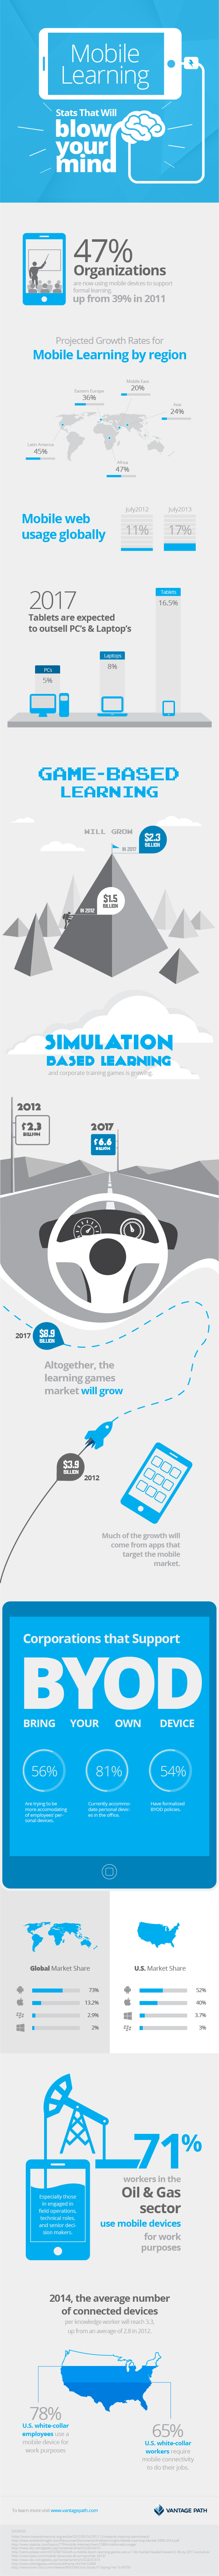 mobile_learning_infographic1